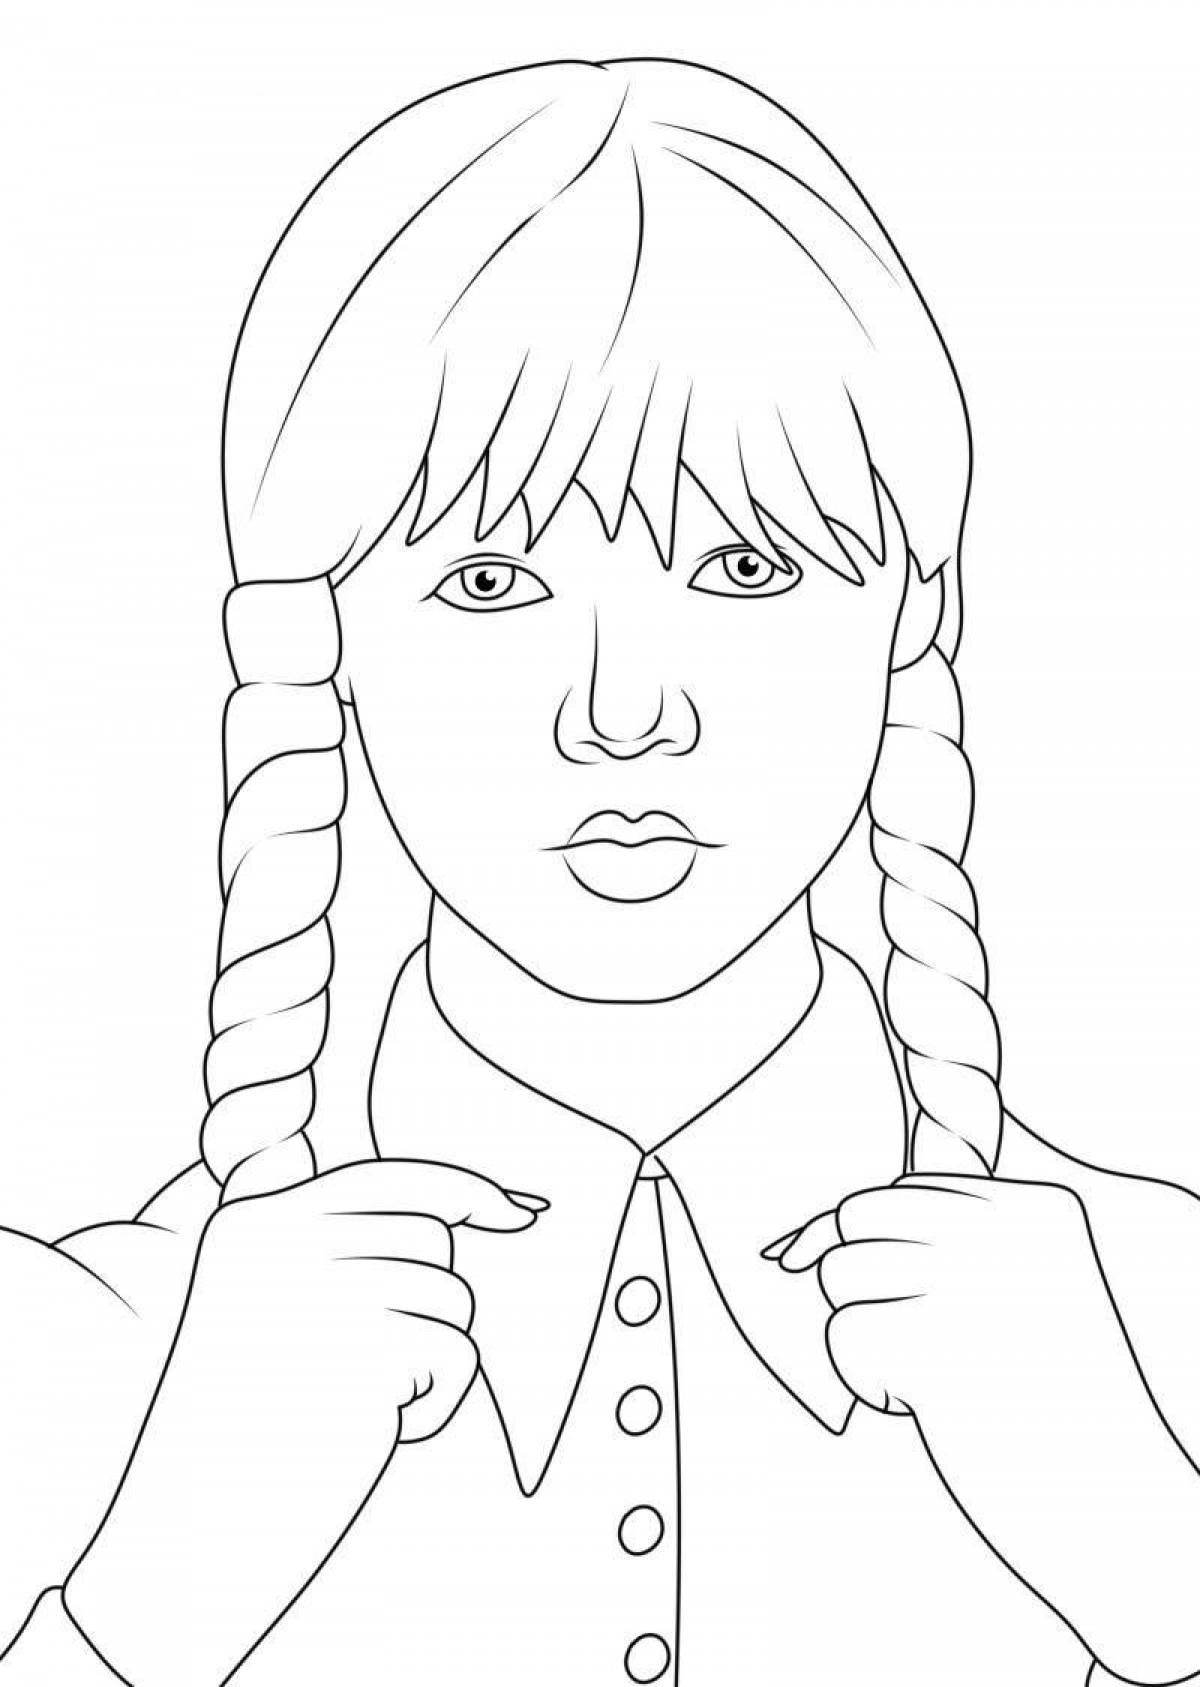 Animated environment coloring page